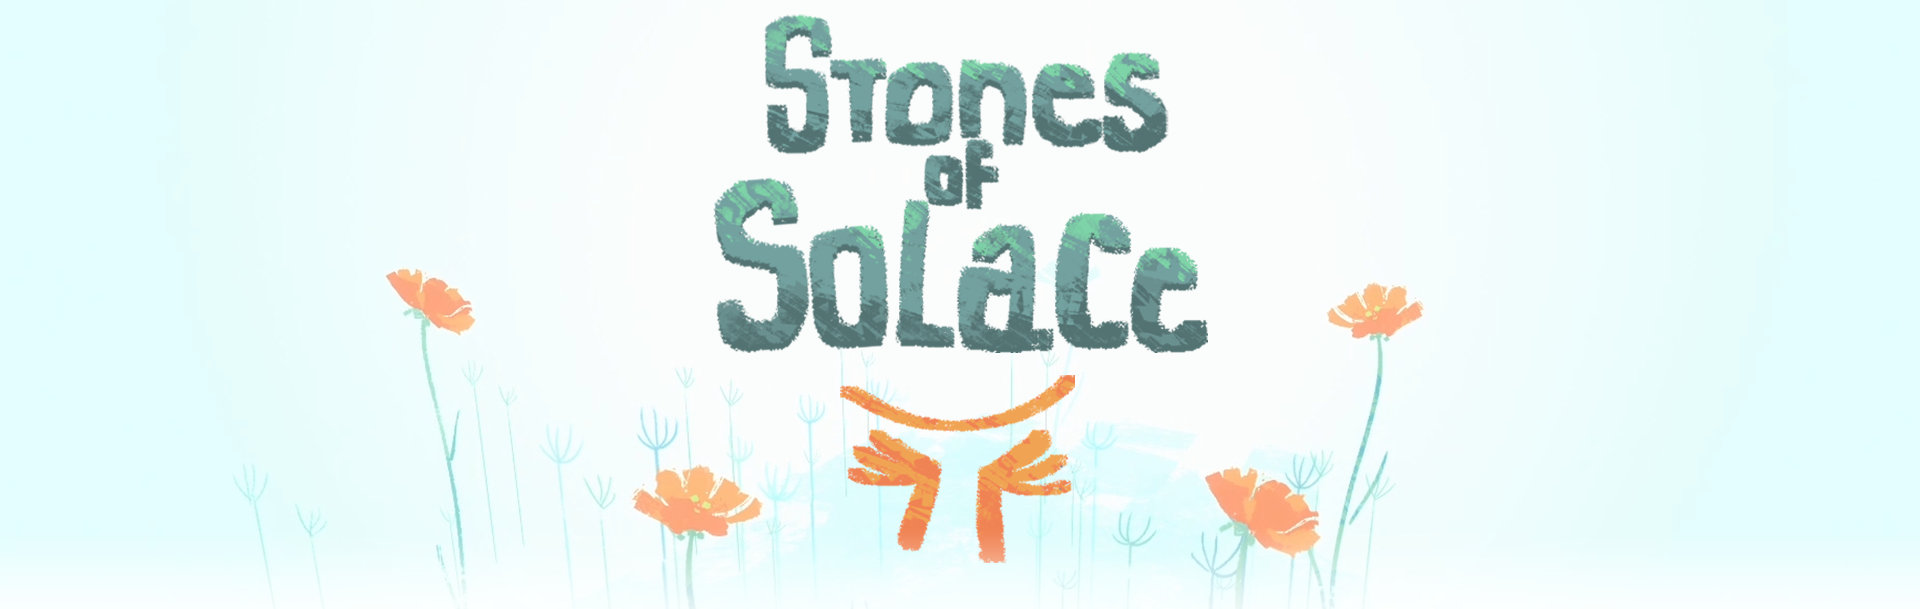 Stones of Solace